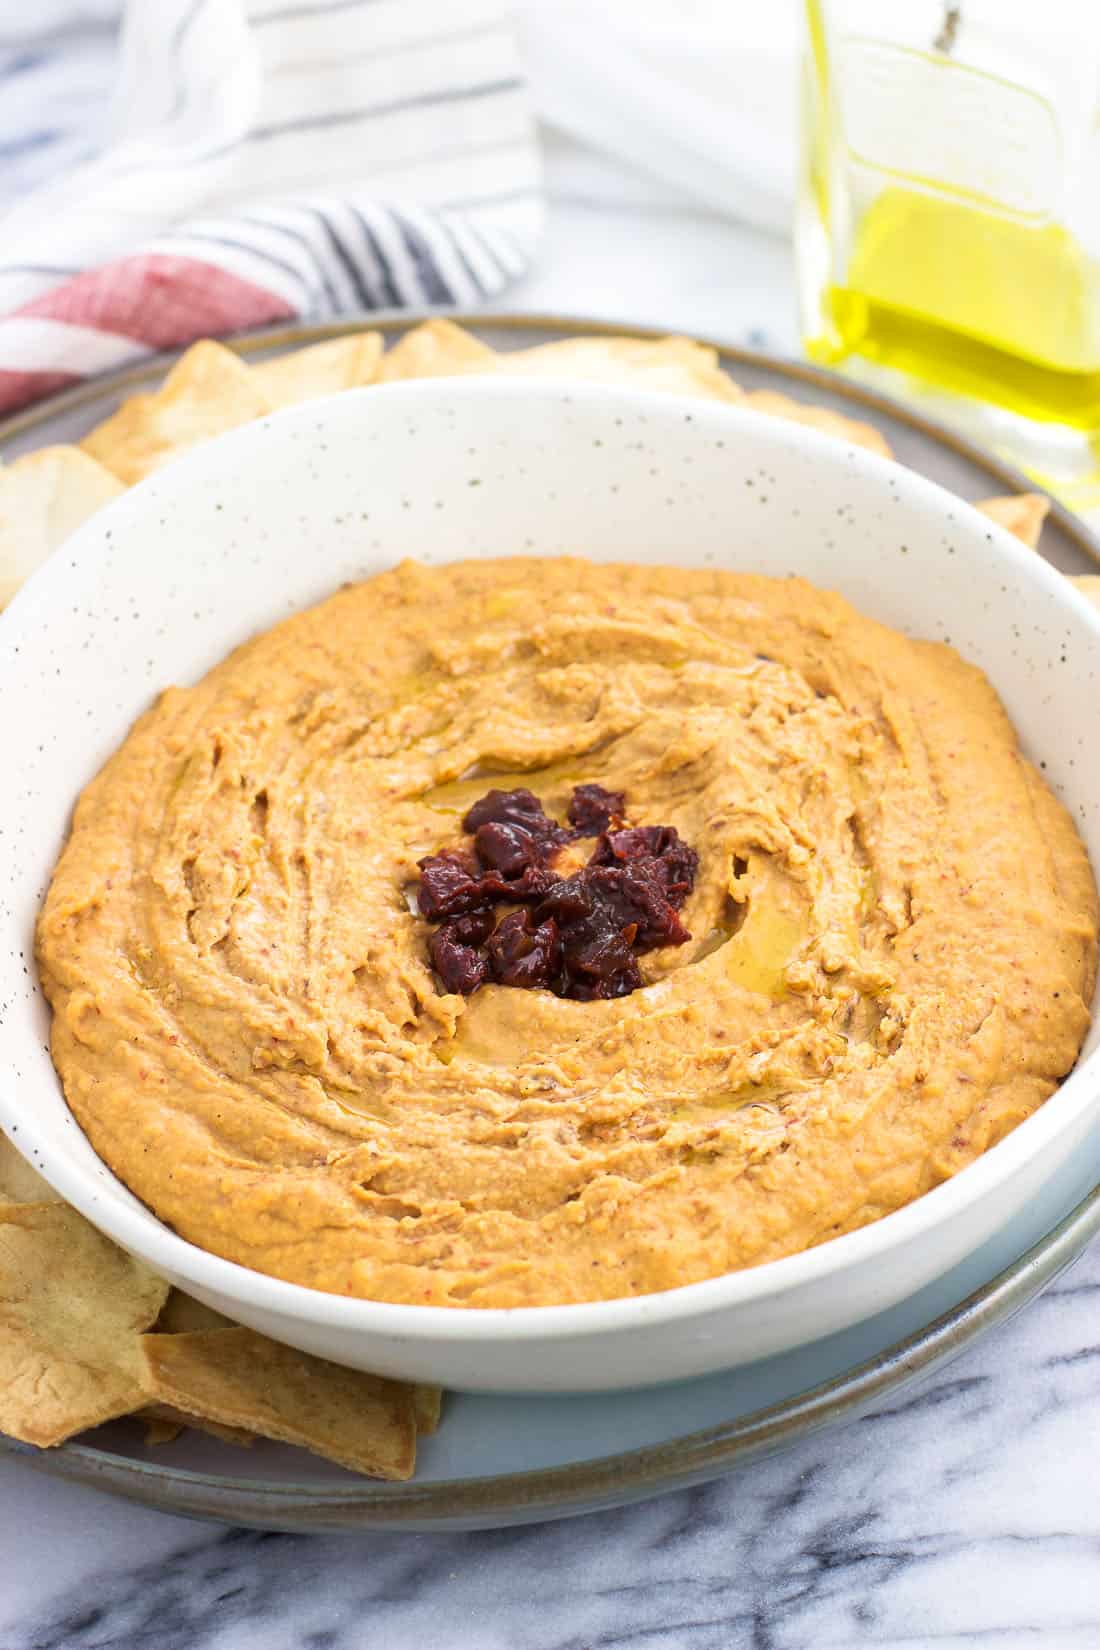 A ceramic bowl filled with hummus, featuring a drizzle of olive oil and chopped chipotle peppers as garnish